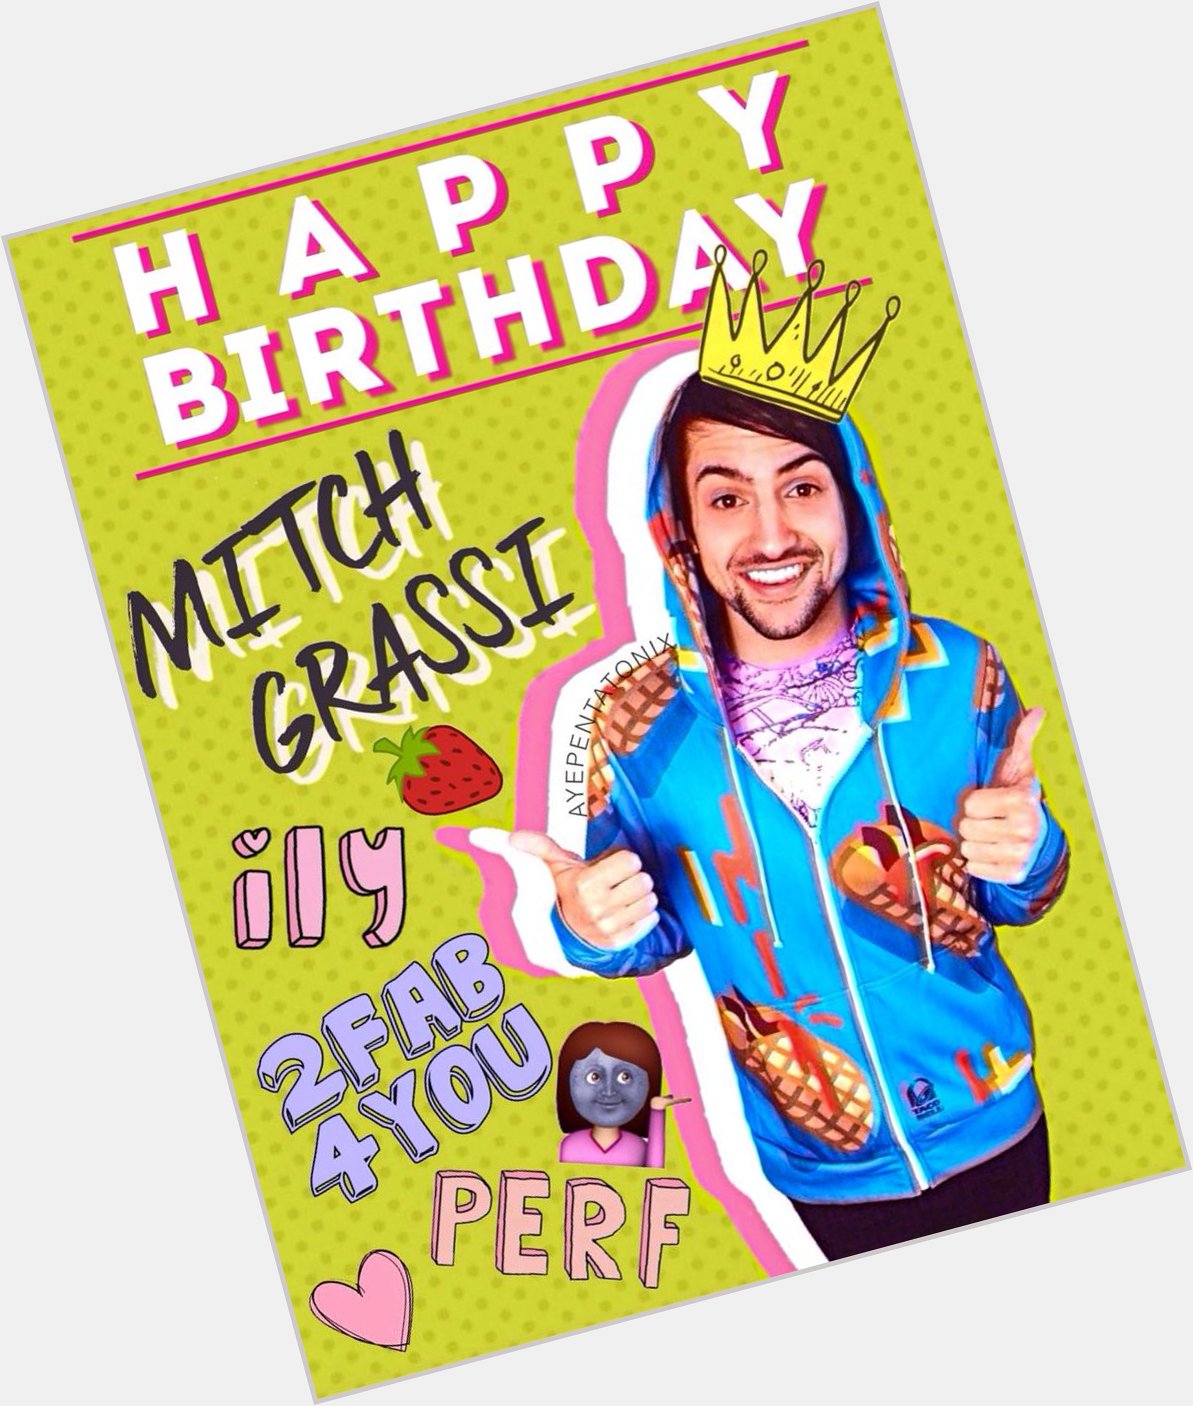 Happy Birthday to my most favourite person in the world Mitch Grassi        